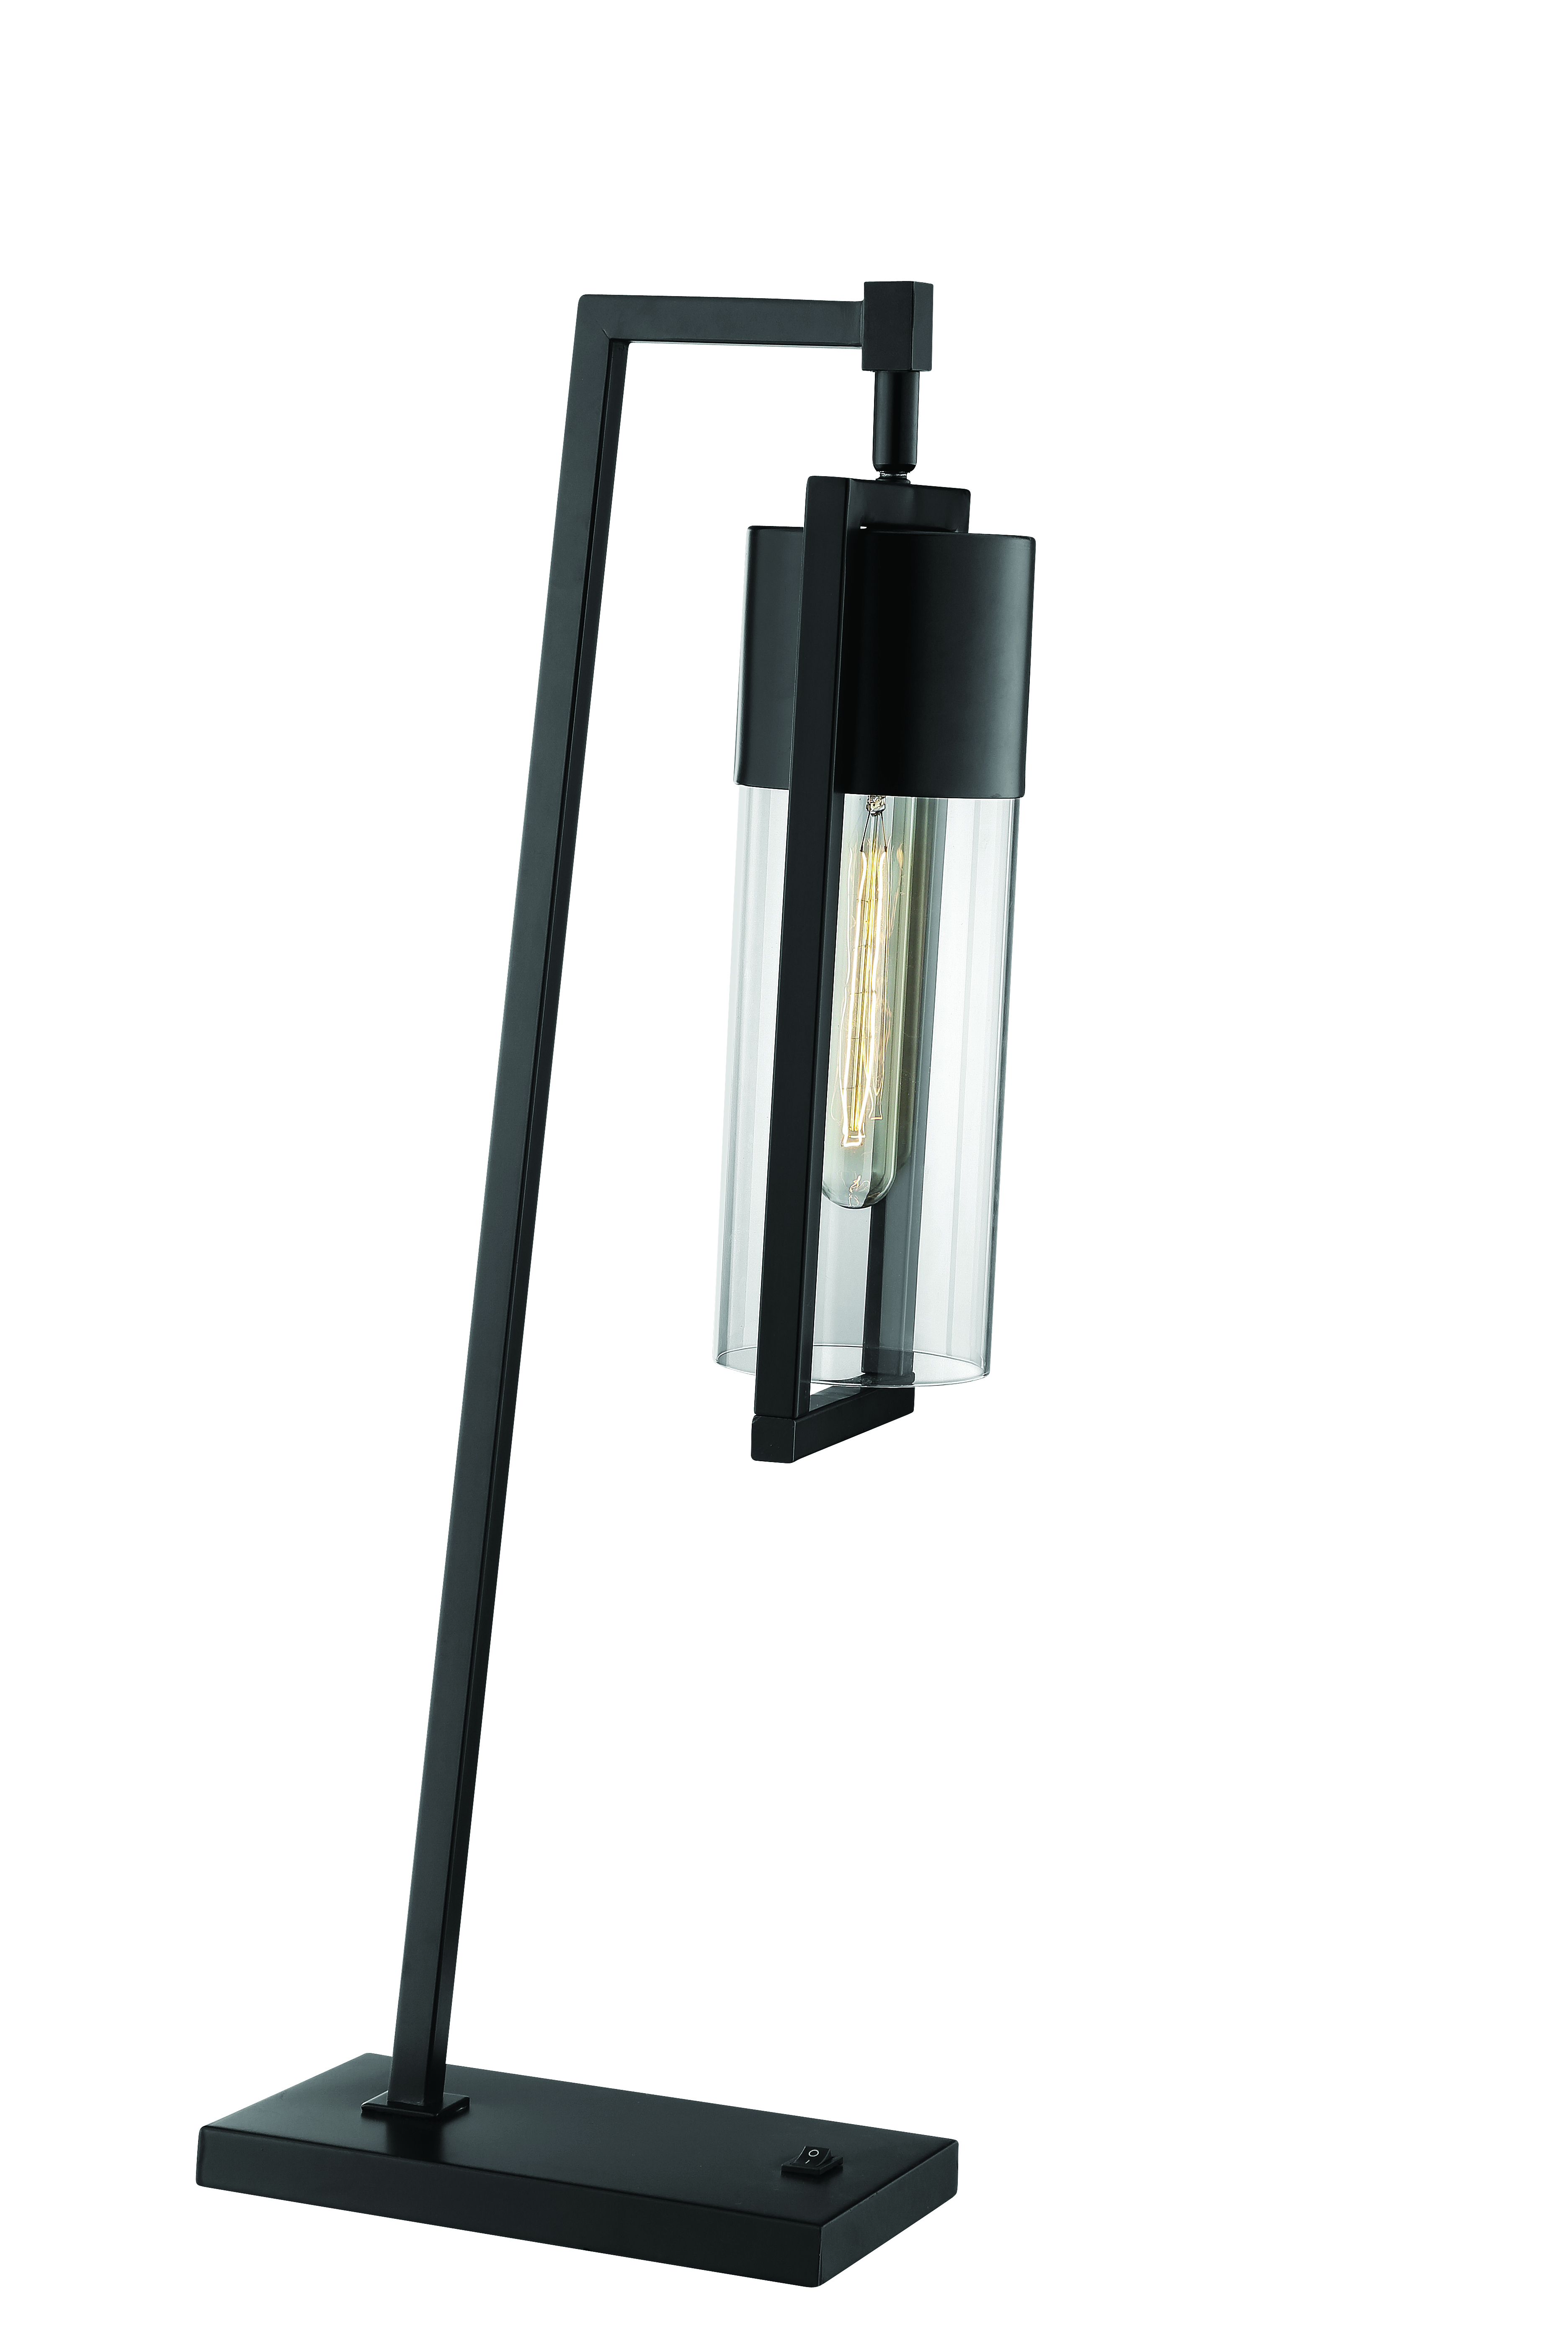 Lite Source Norman collection lamp